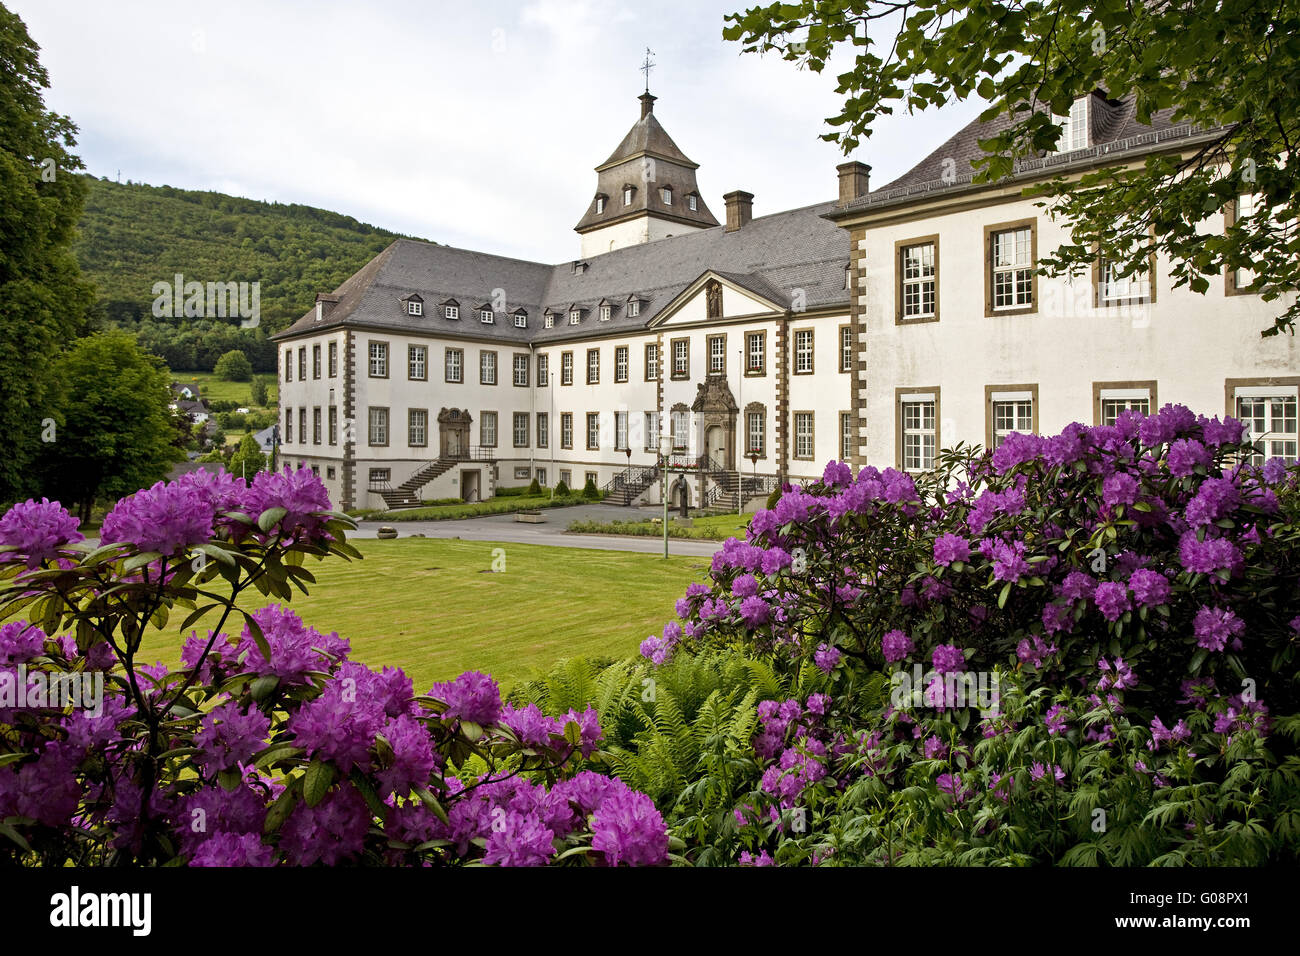 The monastery in the county, Schmallenberg,Germany Stock Photo